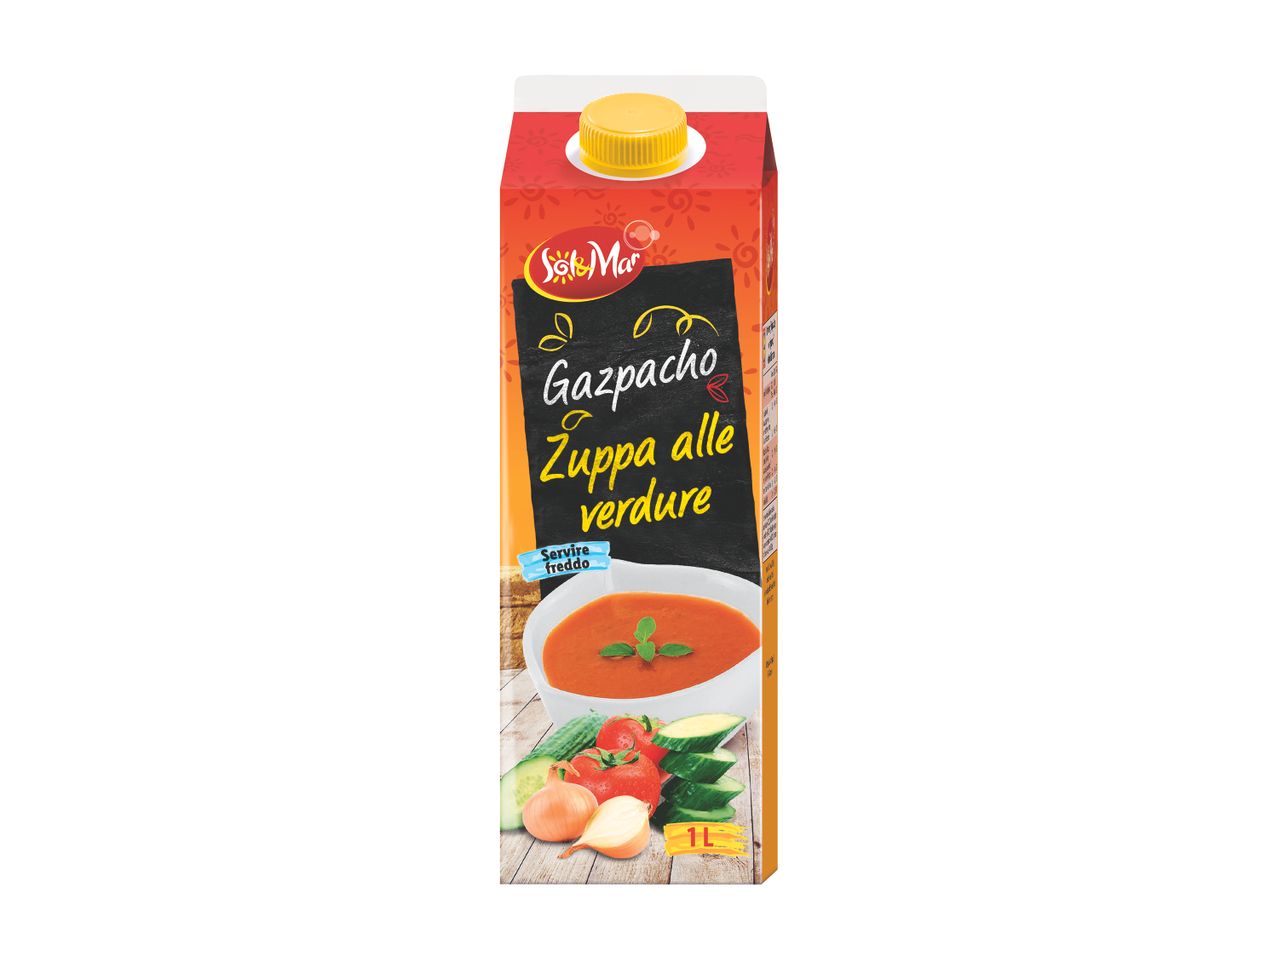 Go to full screen view: Gazpacho - Vegetable Soup - Image 1